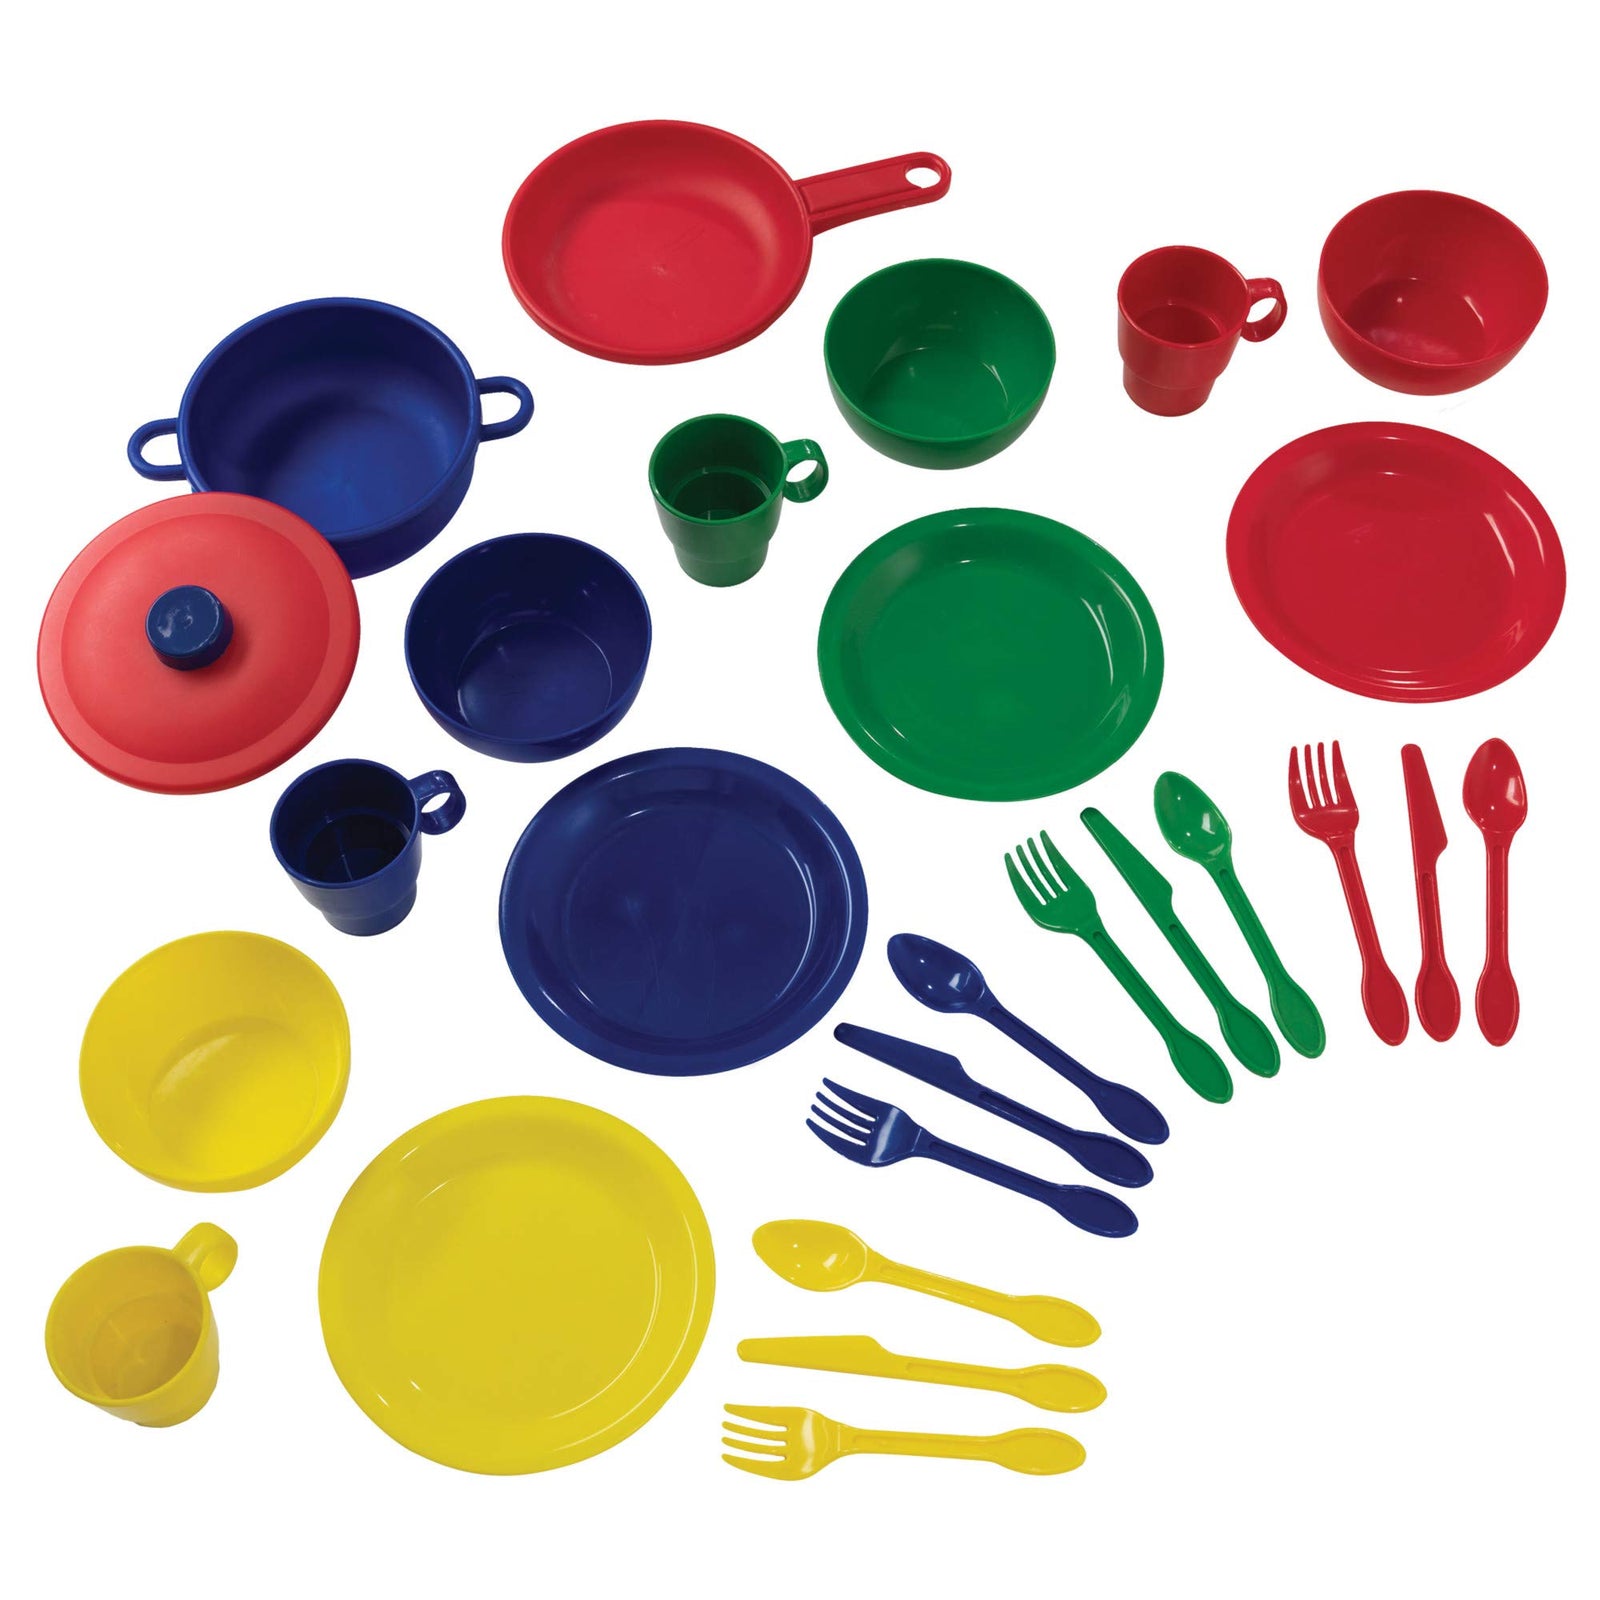 KidKraft 27-Piece Primary Colored Cookware Set, Plastic Dishes and Utensils for Play Kitchens, Gift for Ages 18 mo+